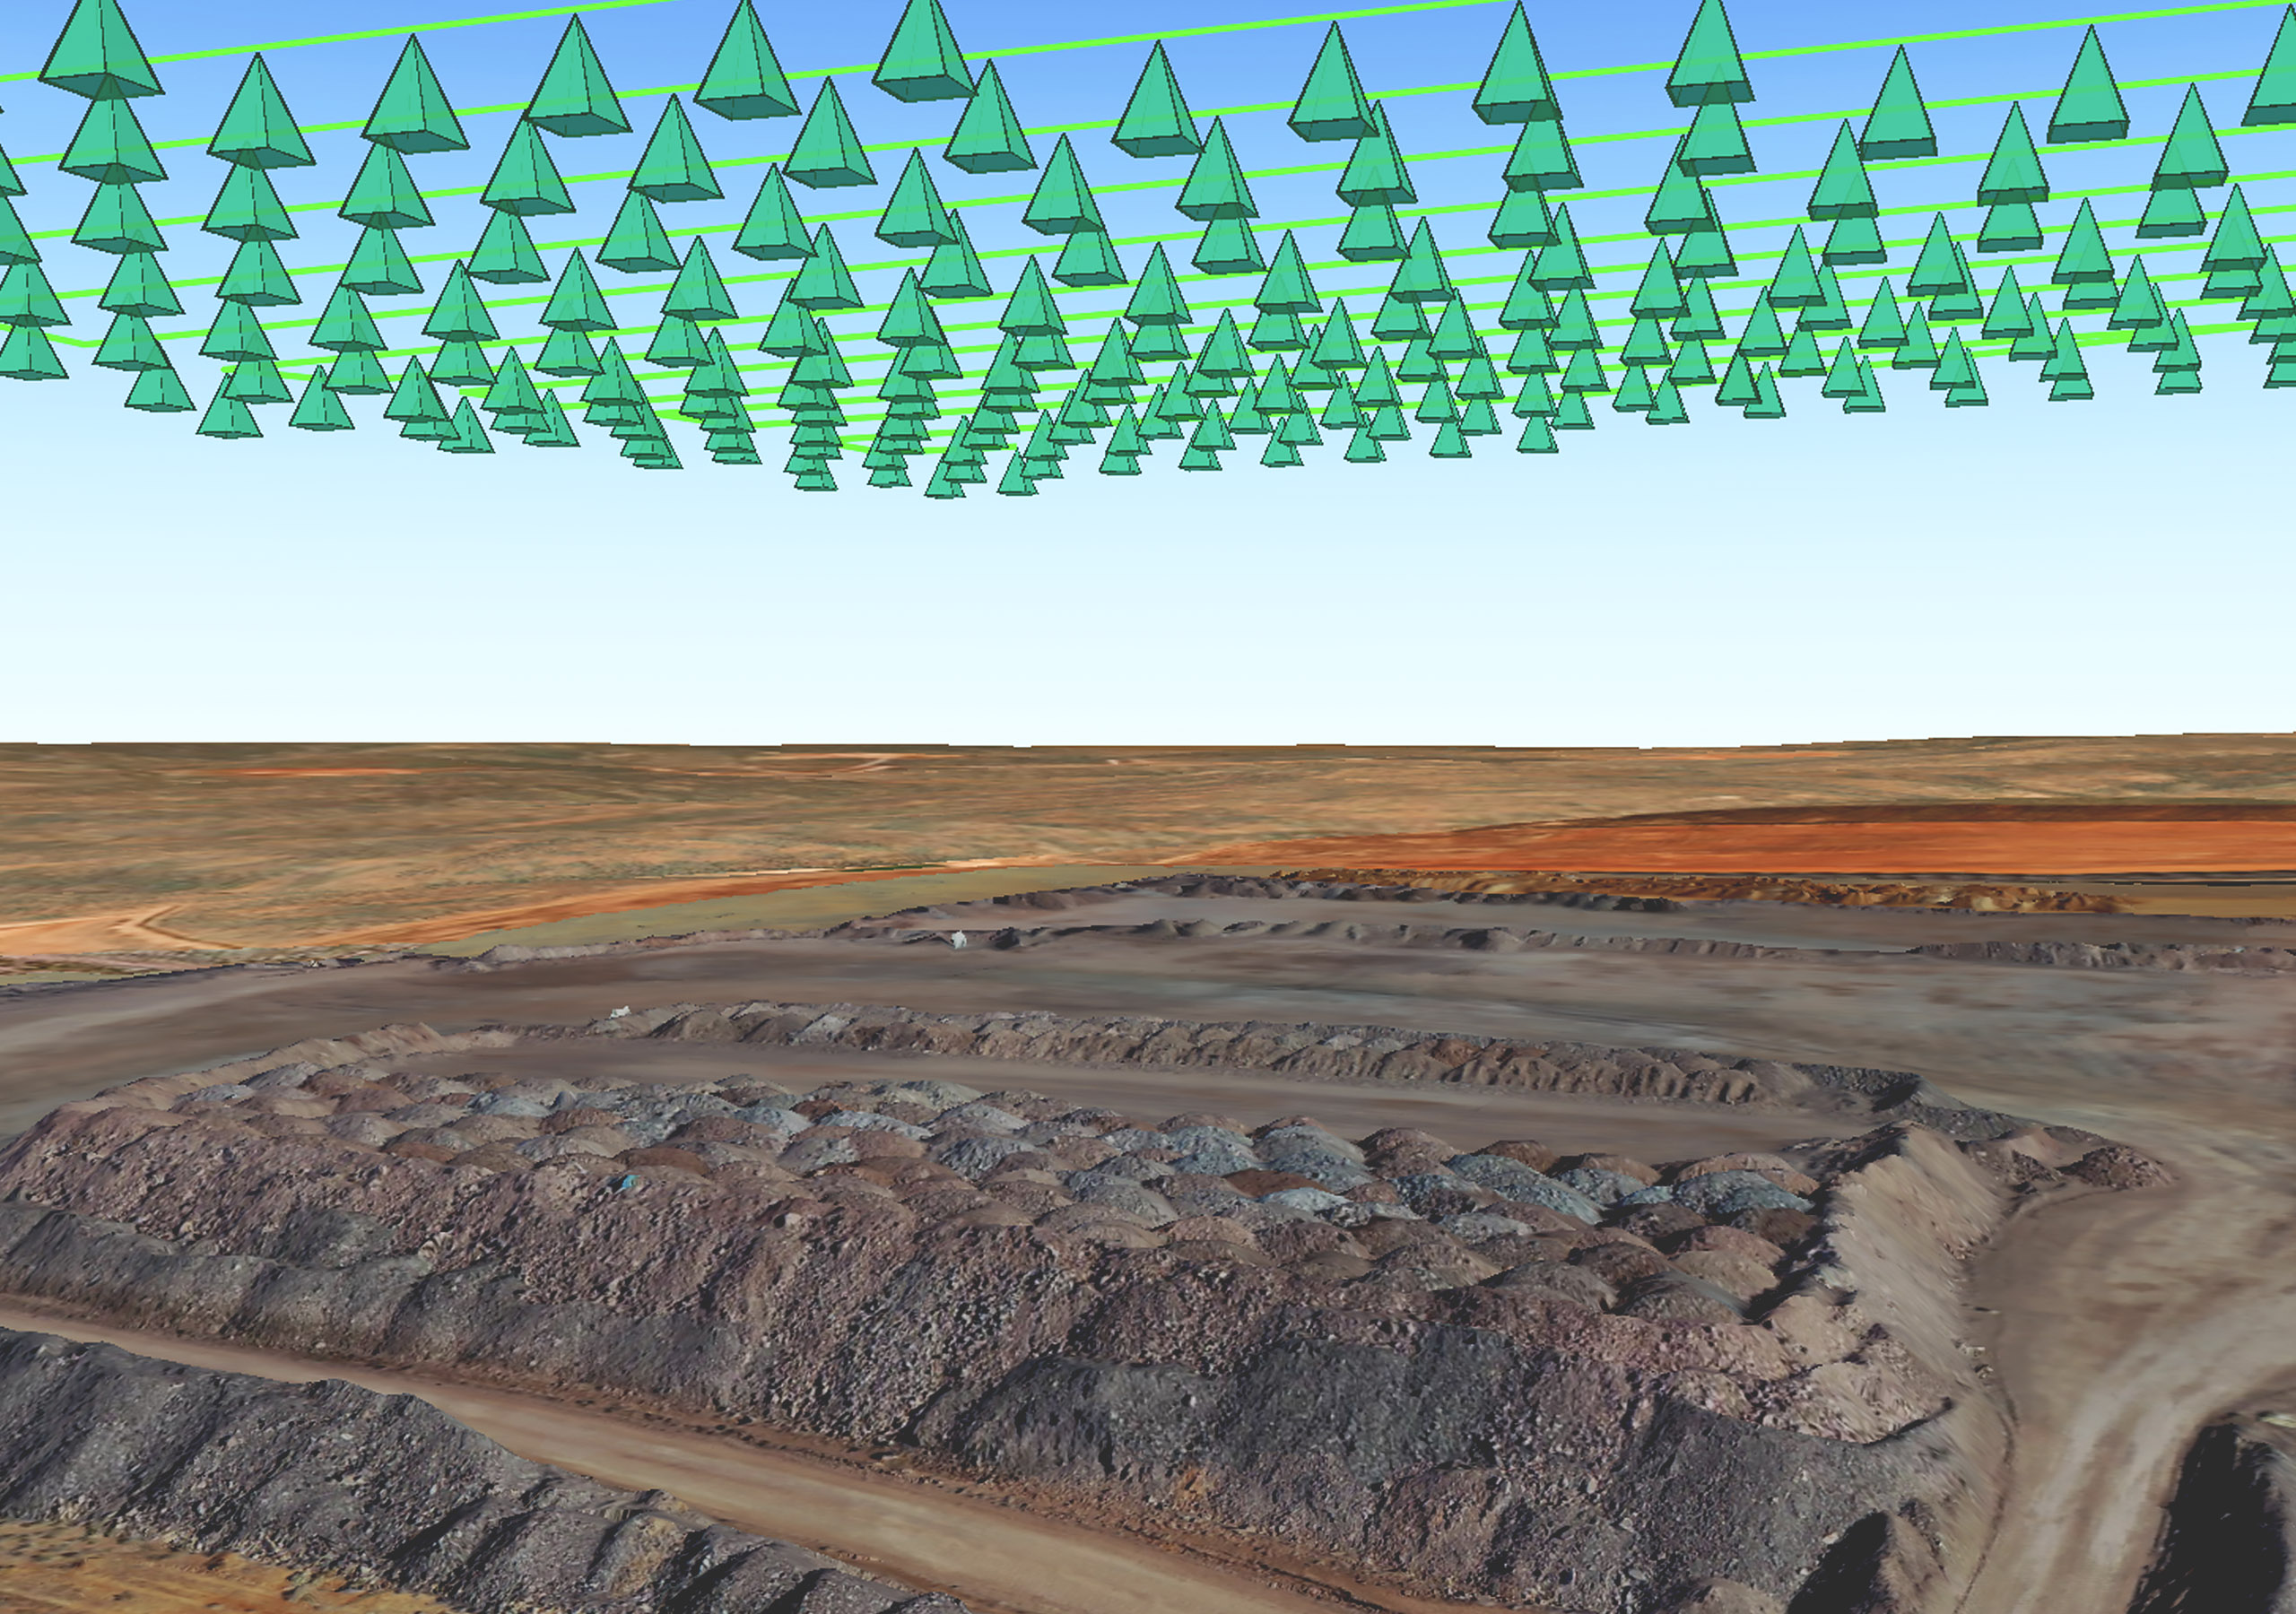 A 3D map of a construction site shows a drone flight path over the ground